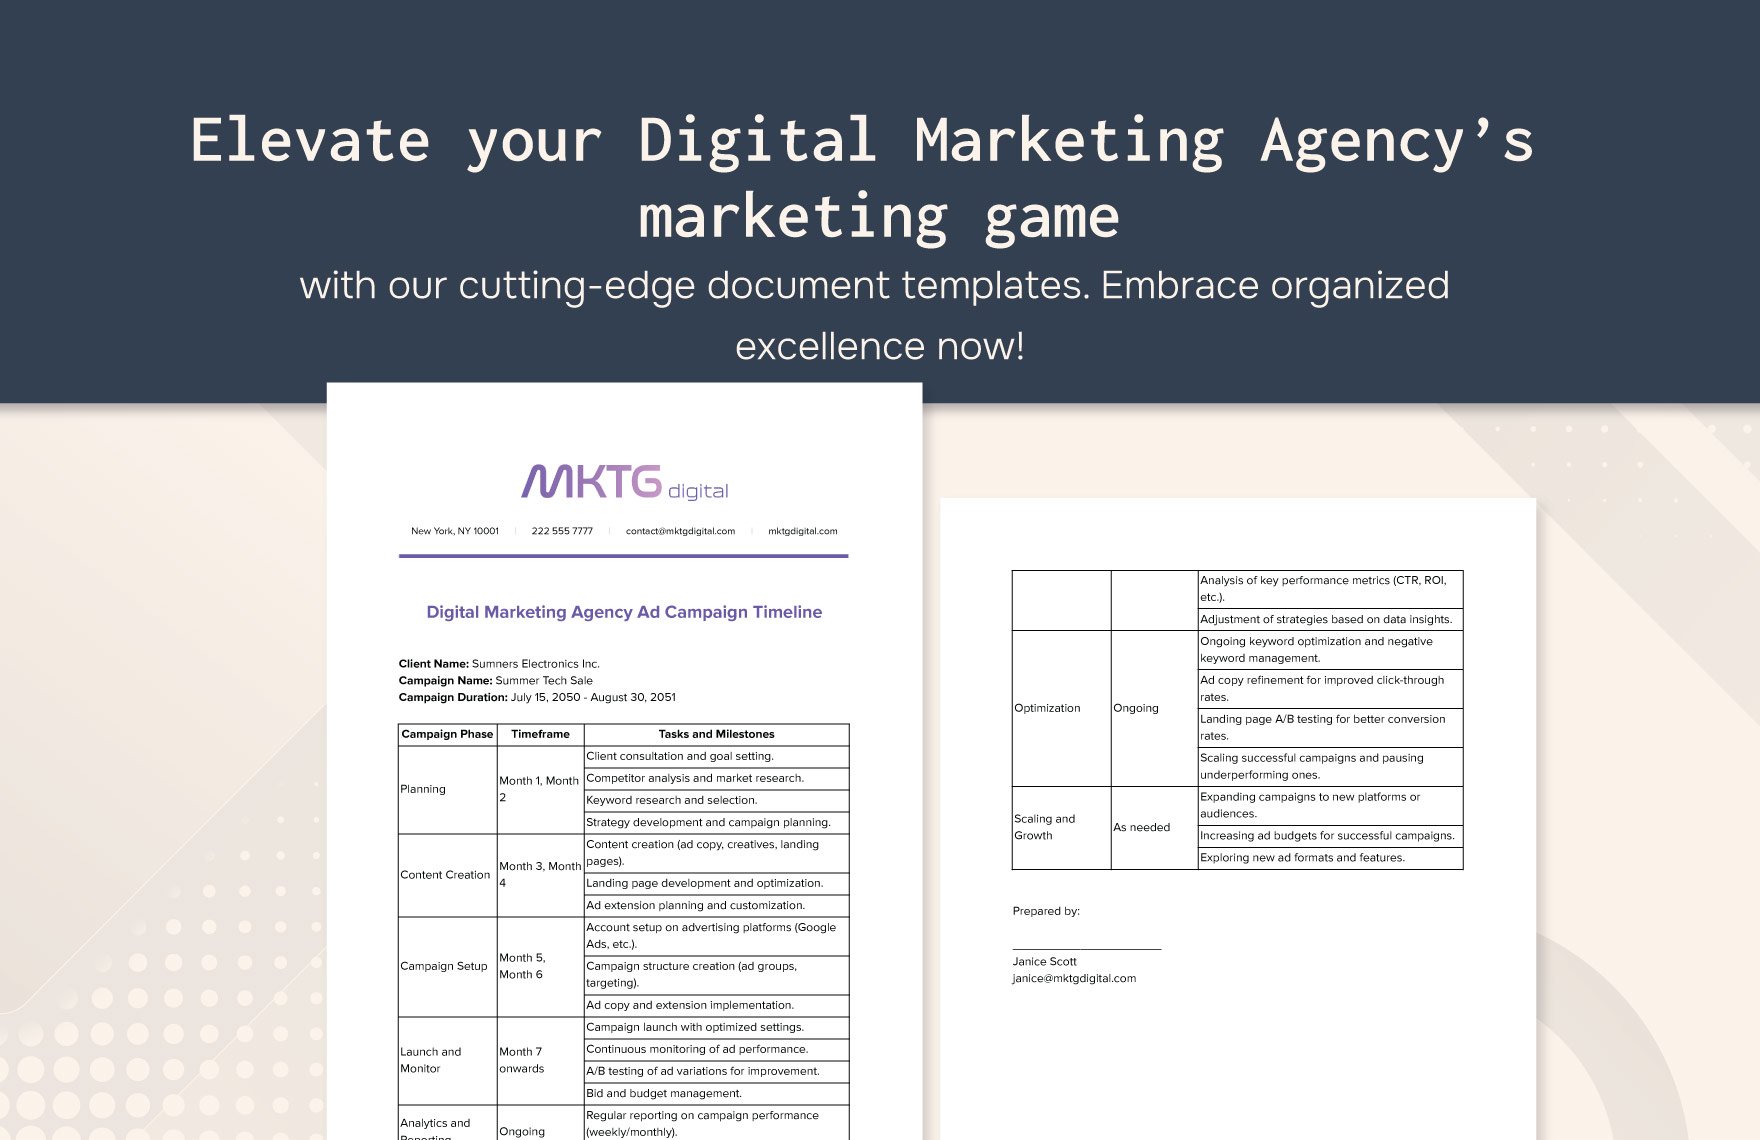 Digital Marketing Agency Ad Campaign Timeline Template